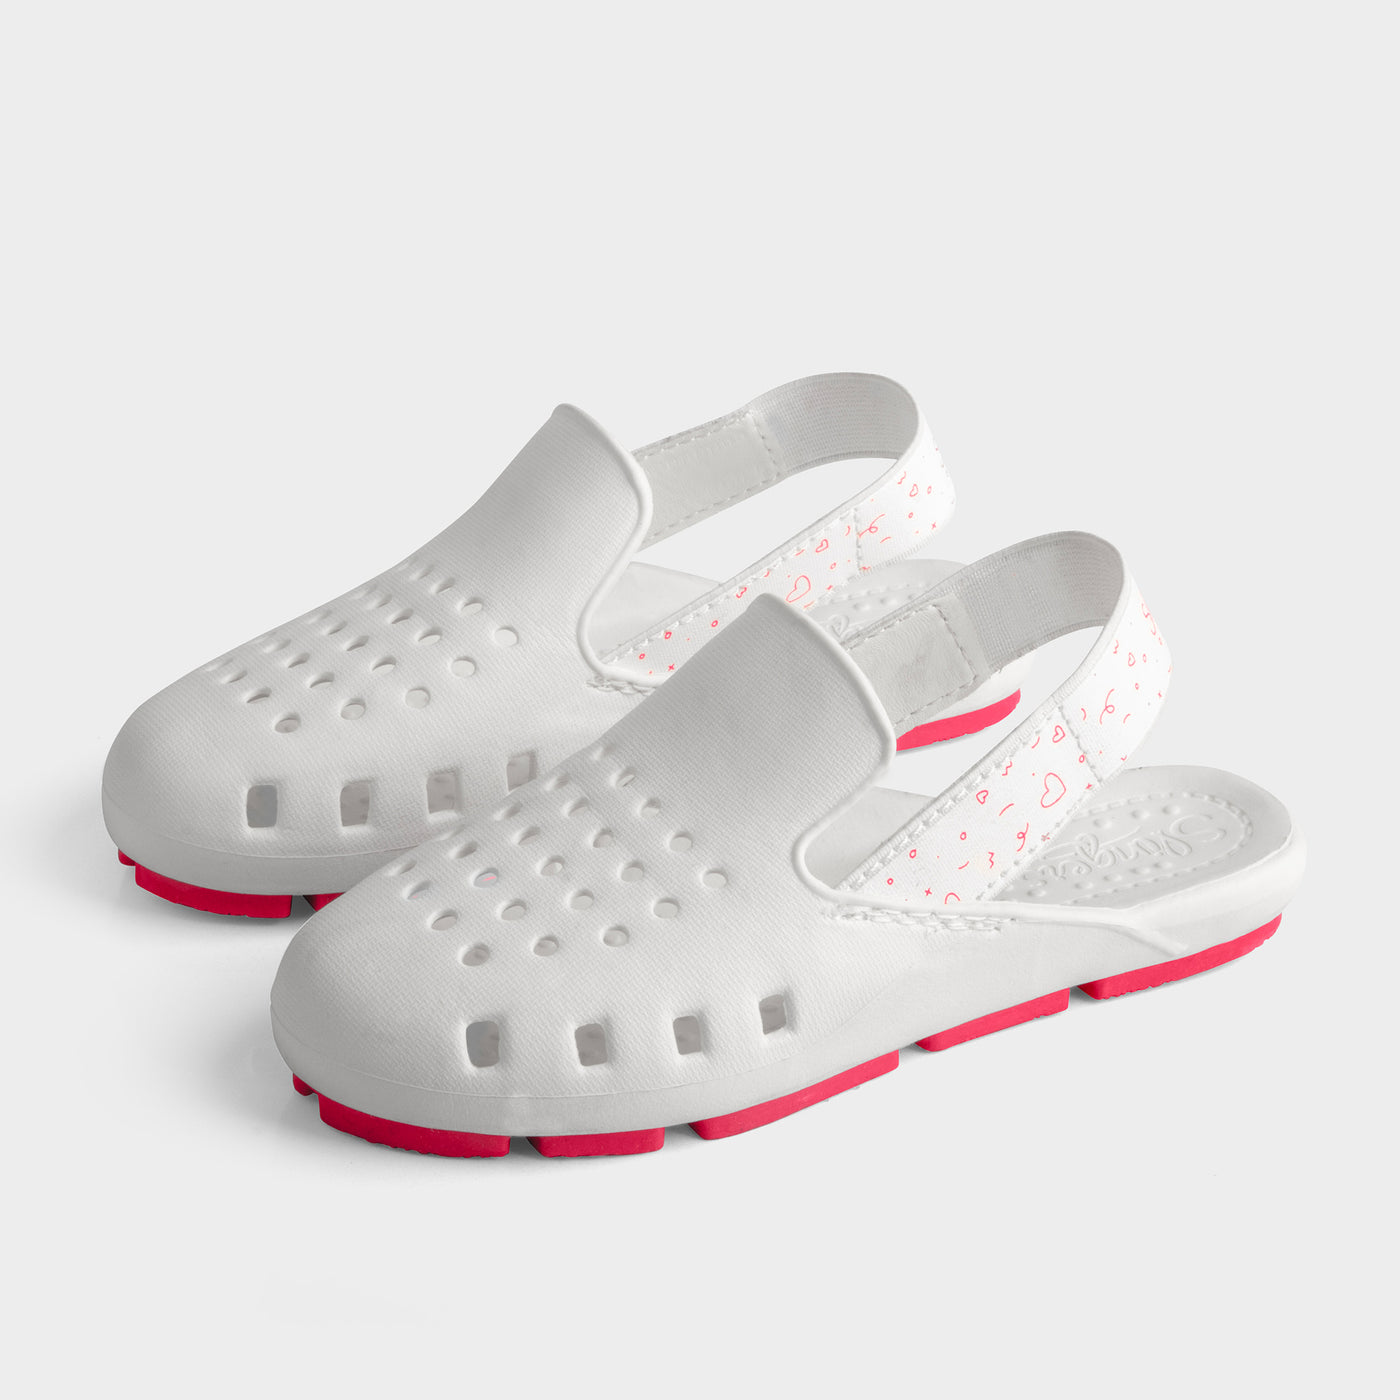 white + barbie pink shoes for girls. water shoes with elastic back and heart print slingback